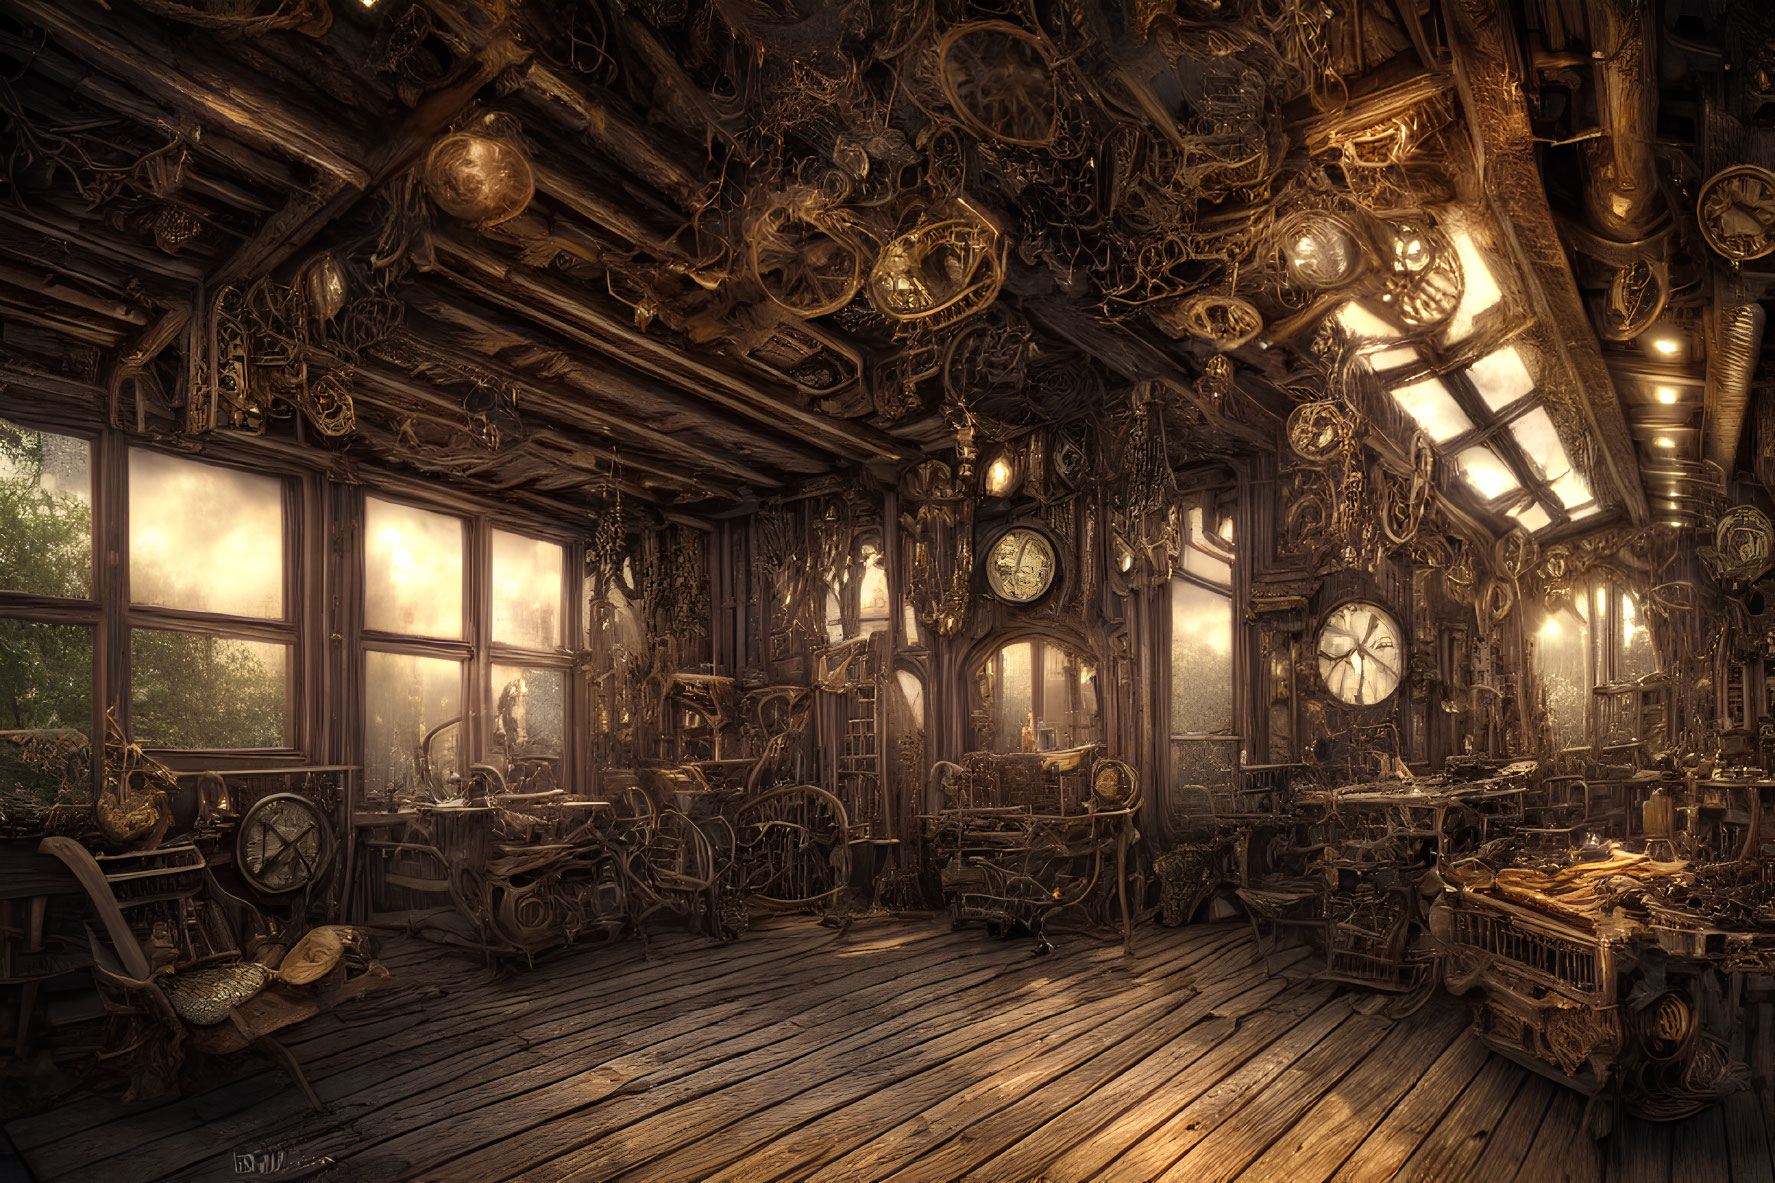 Steampunk-themed room with intricate machinery, gears, and clocks